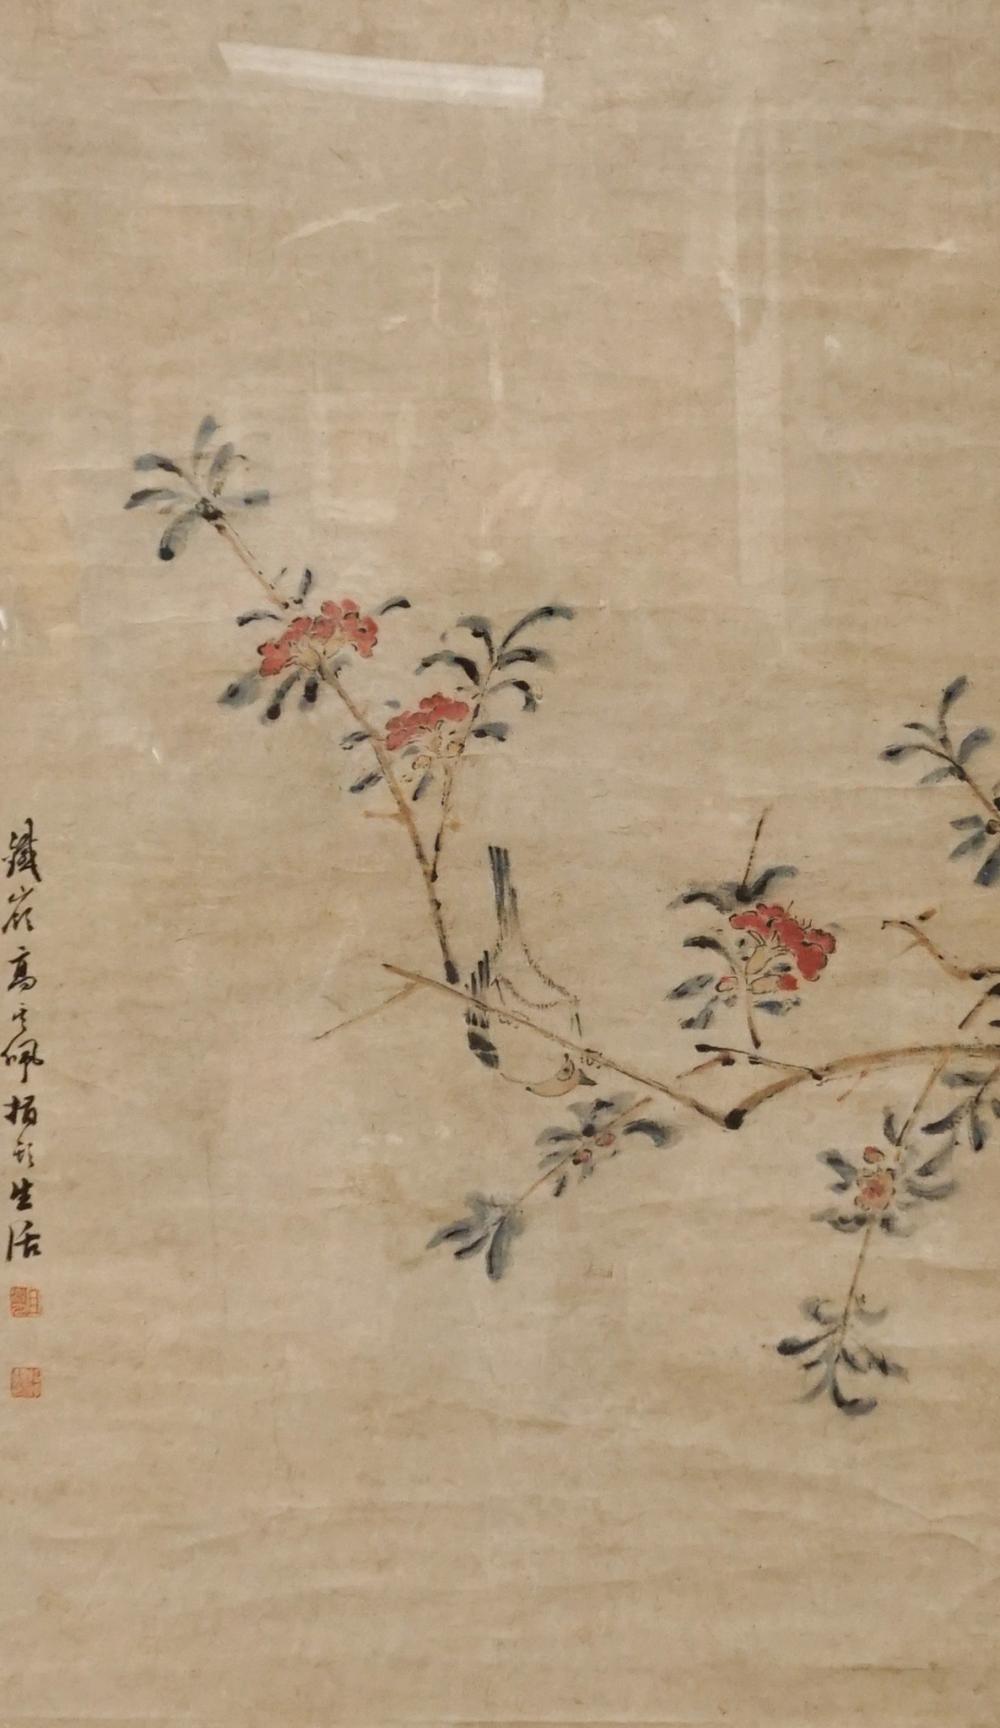 JAPANESE BIRDS ON BRANCH WATERCOLOR 2e782f